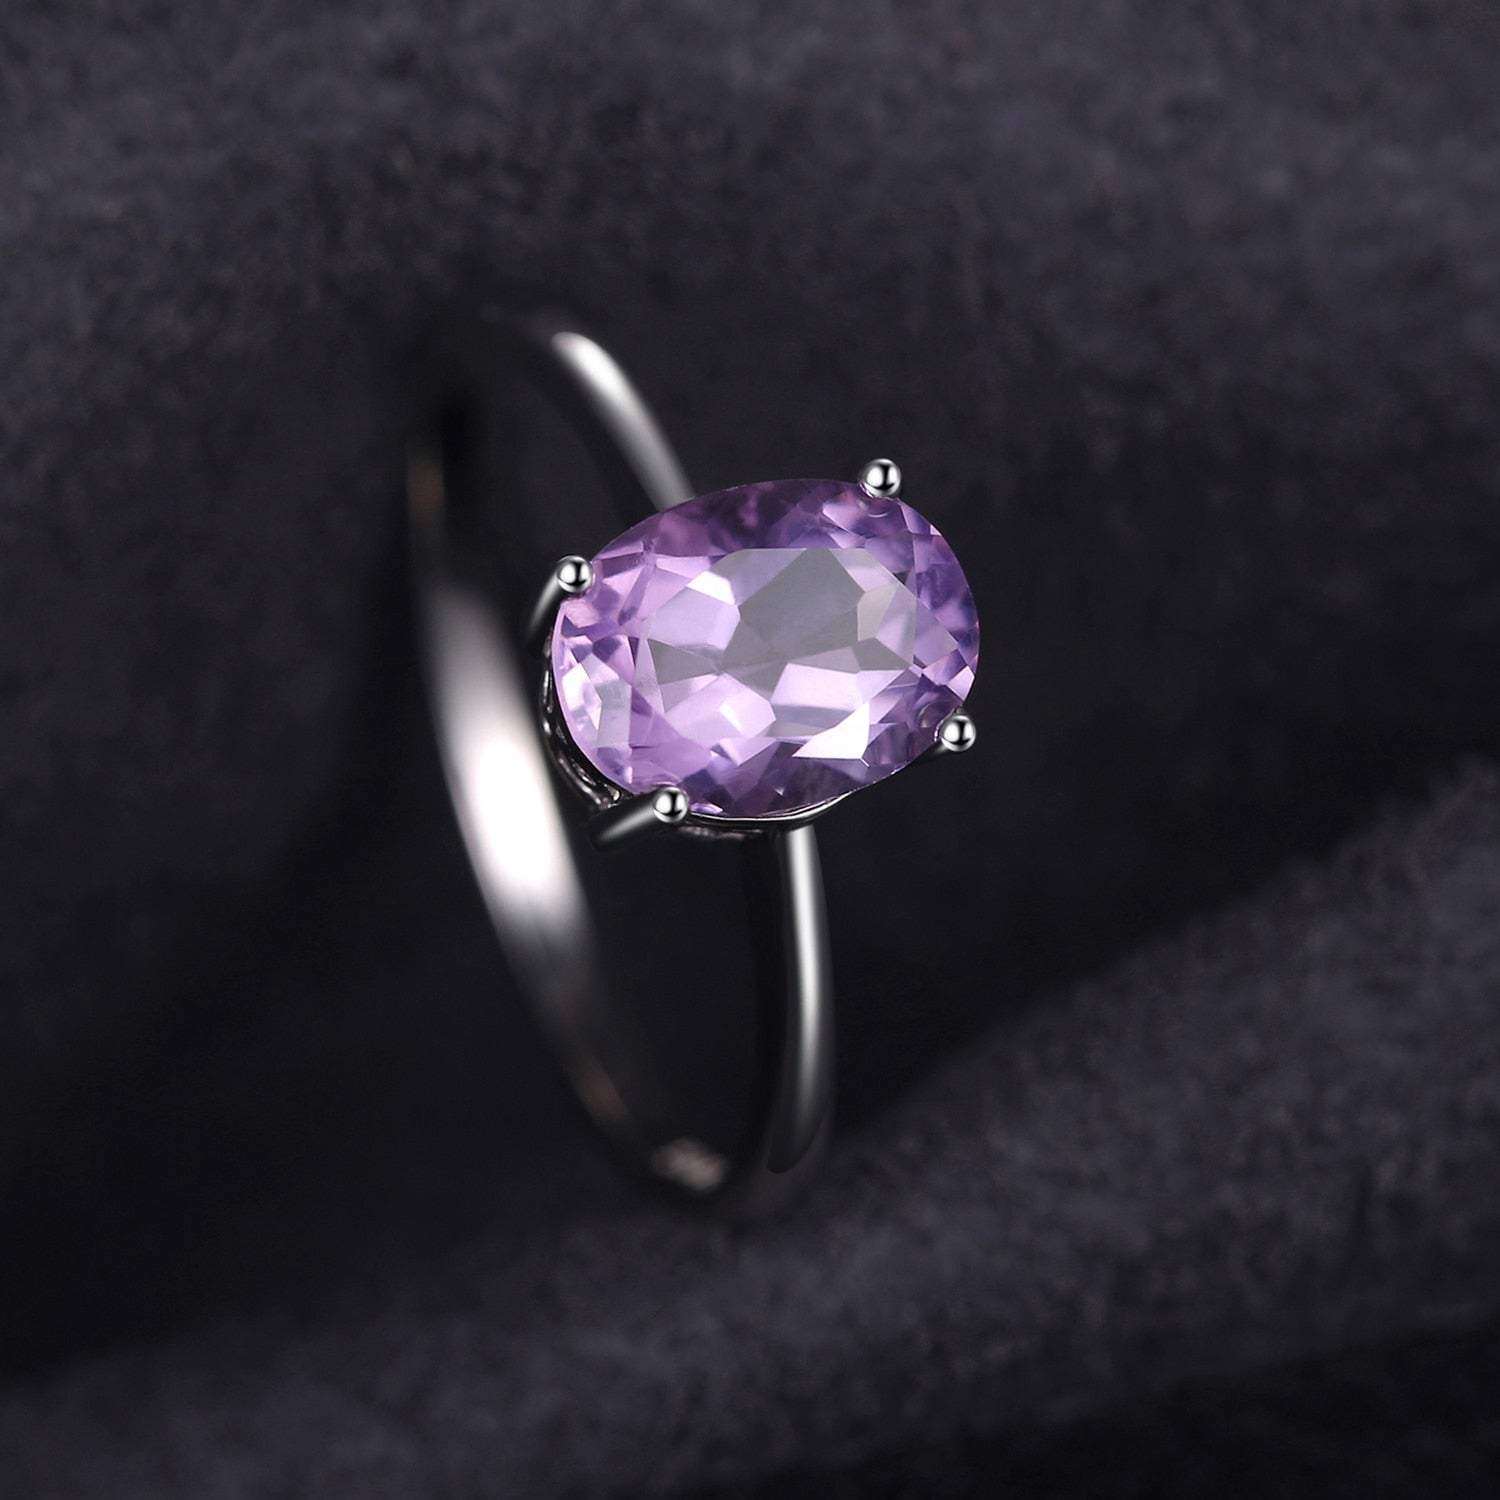 JewelryPalace Genuine Amethyst Ring Solitaire 925 Sterling Silver Rings for Women Engagement Ring Silver 925 Gemstones Jewelry